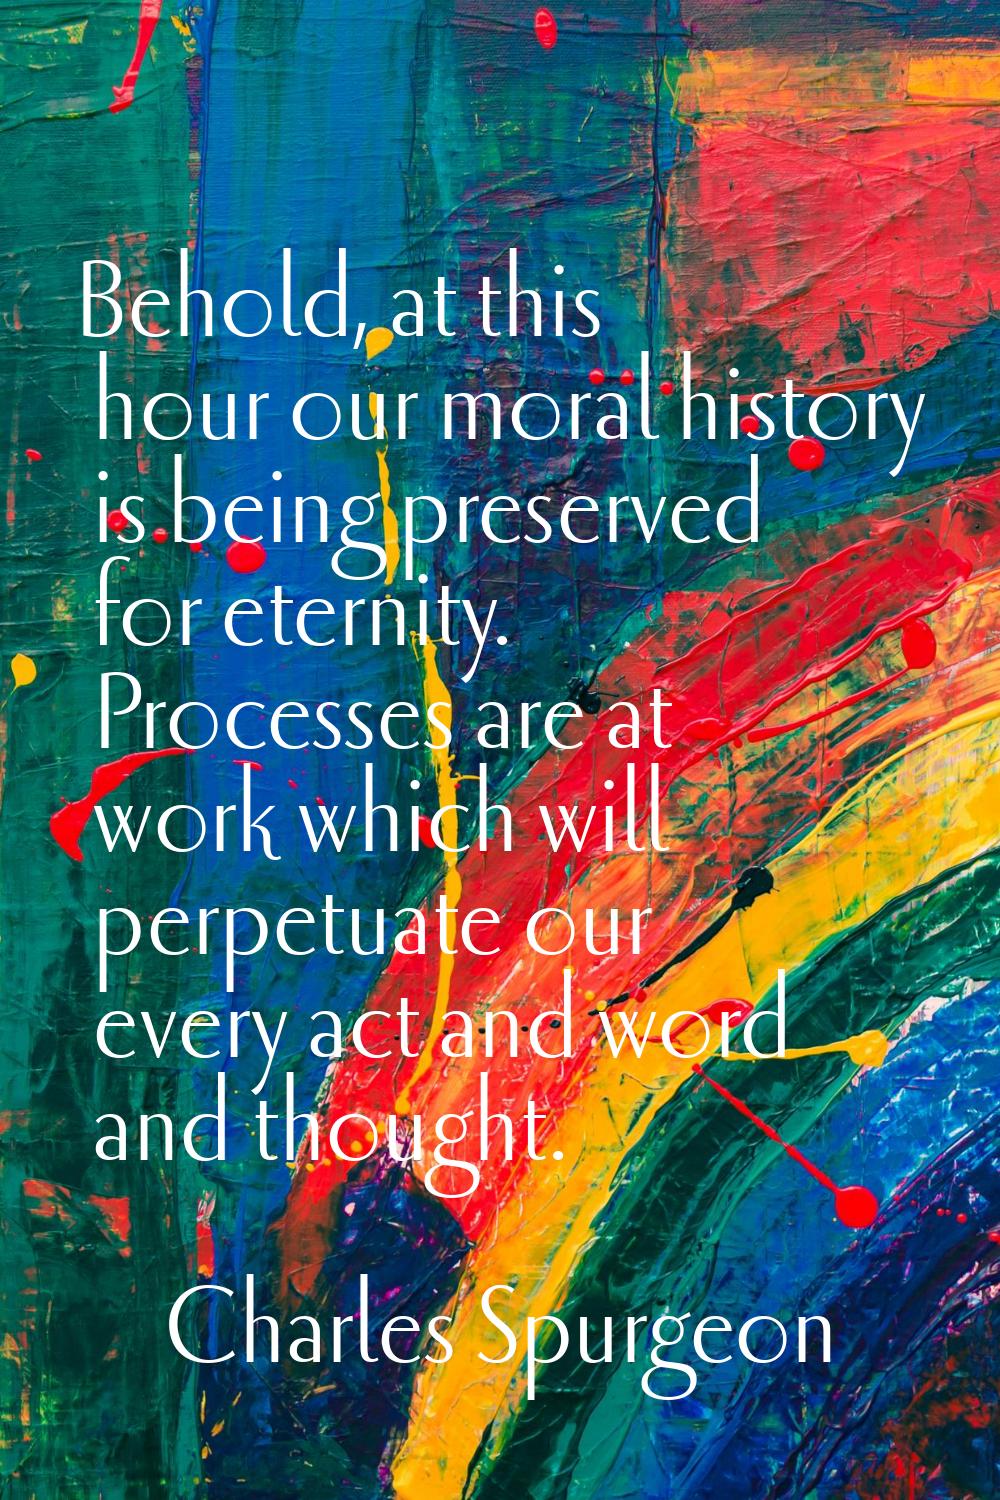 Behold, at this hour our moral history is being preserved for eternity. Processes are at work which